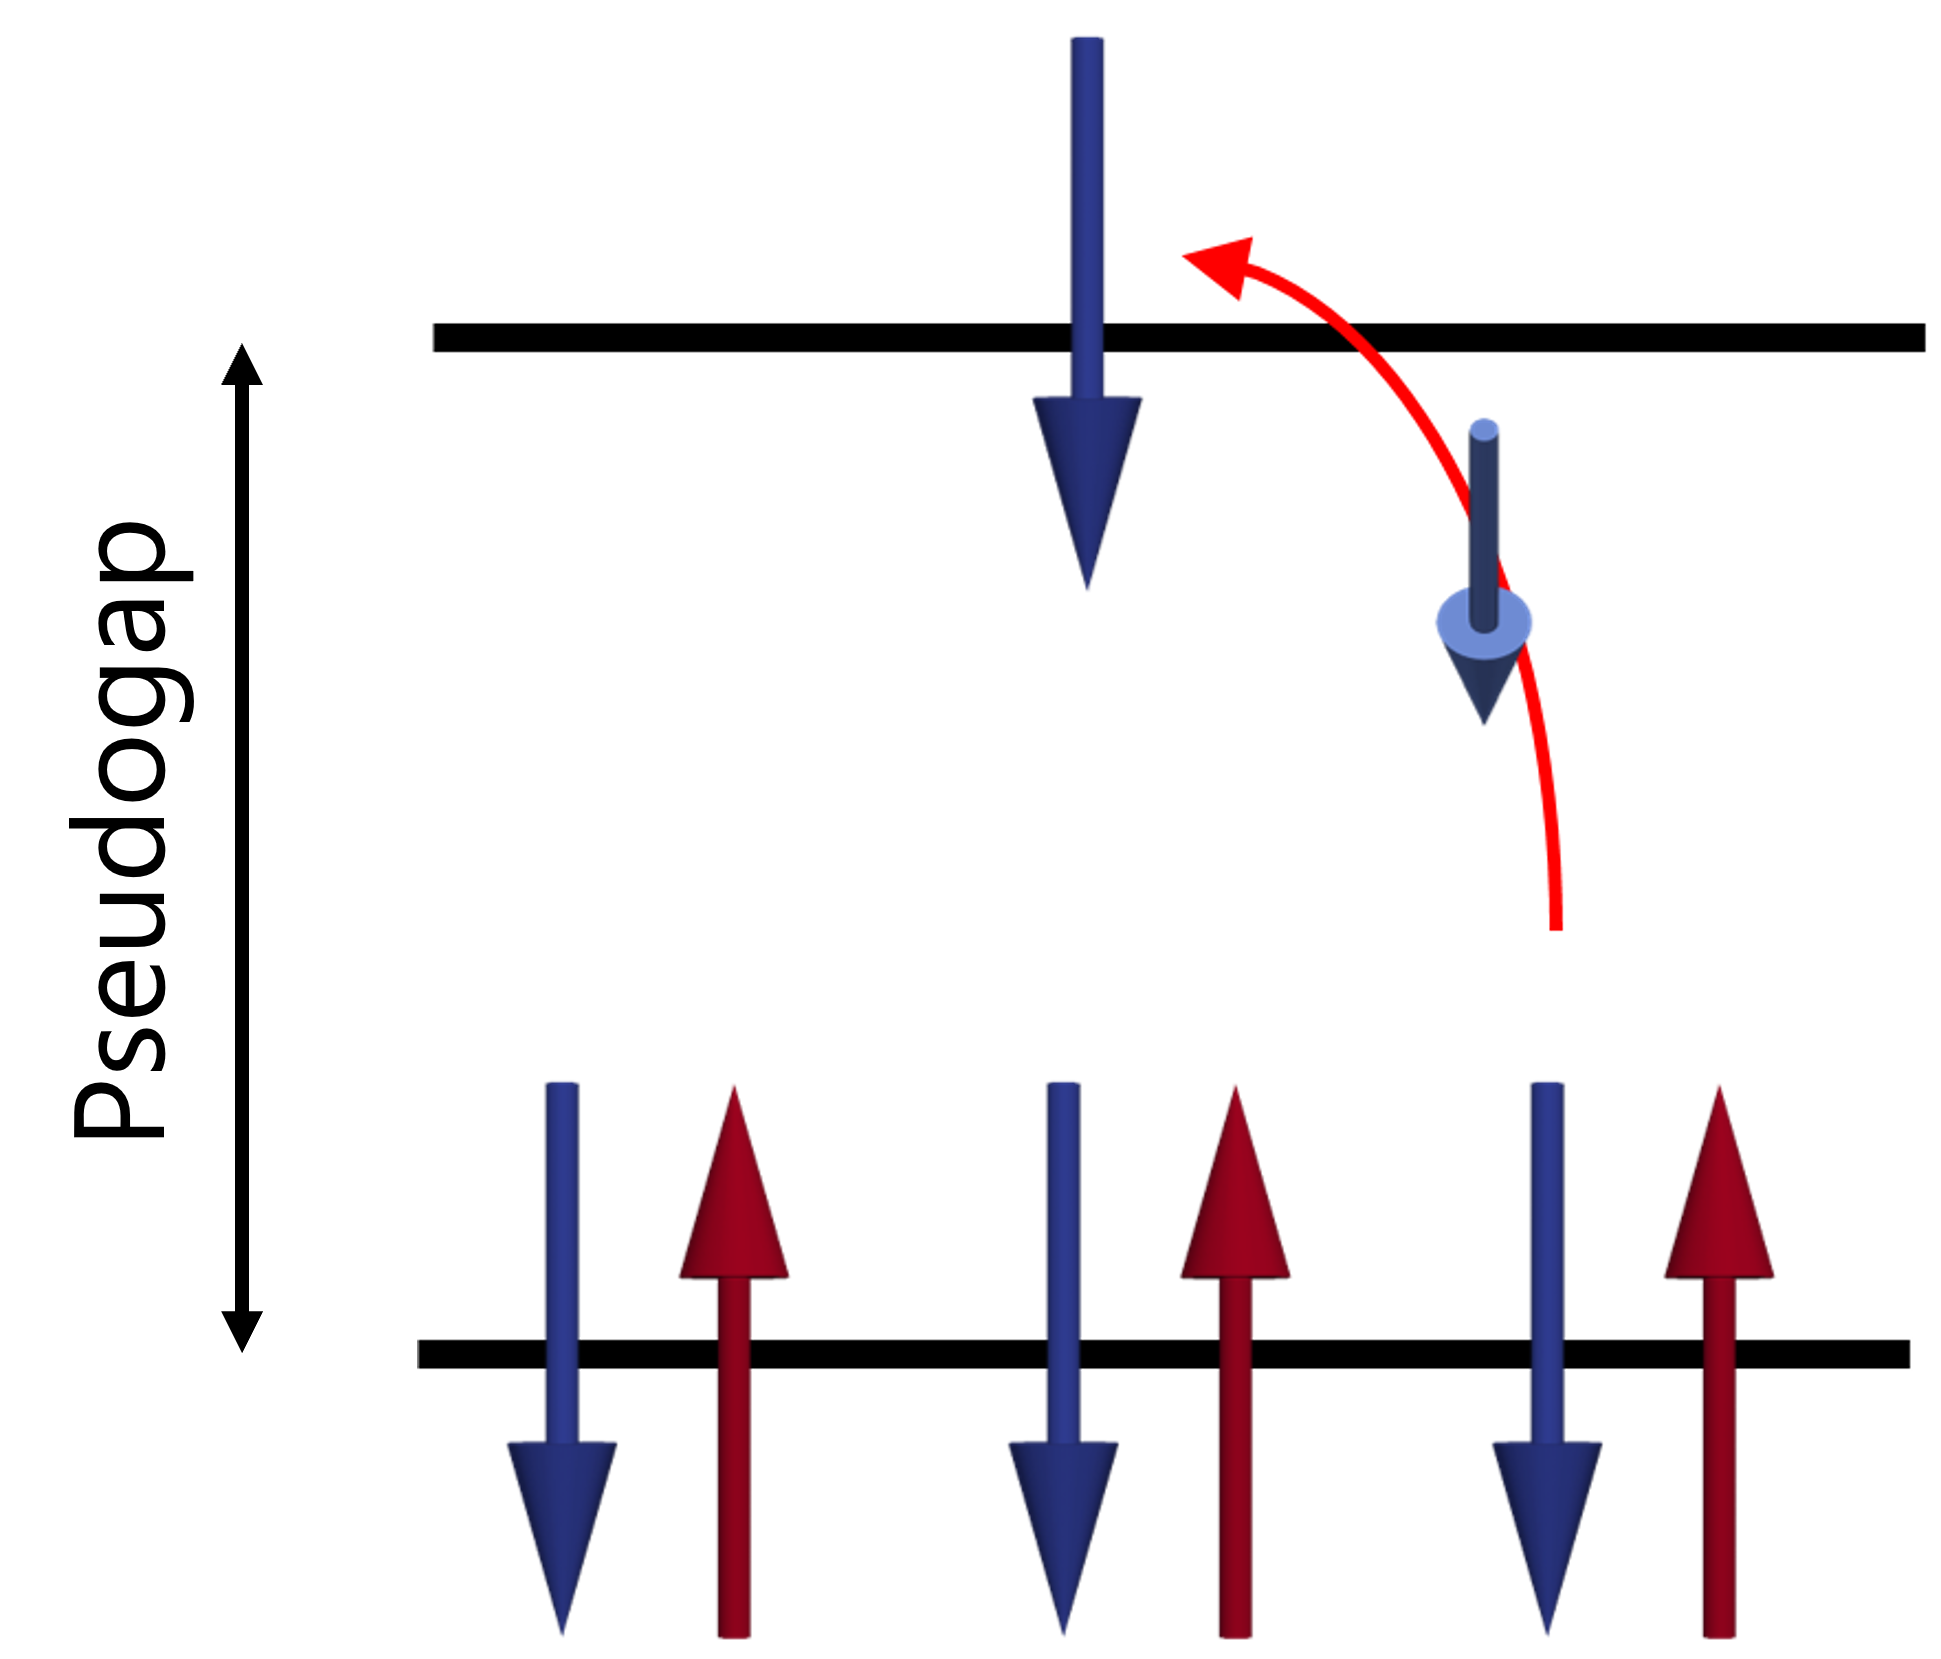 Grpahic showing spin excitations across the pseudogap